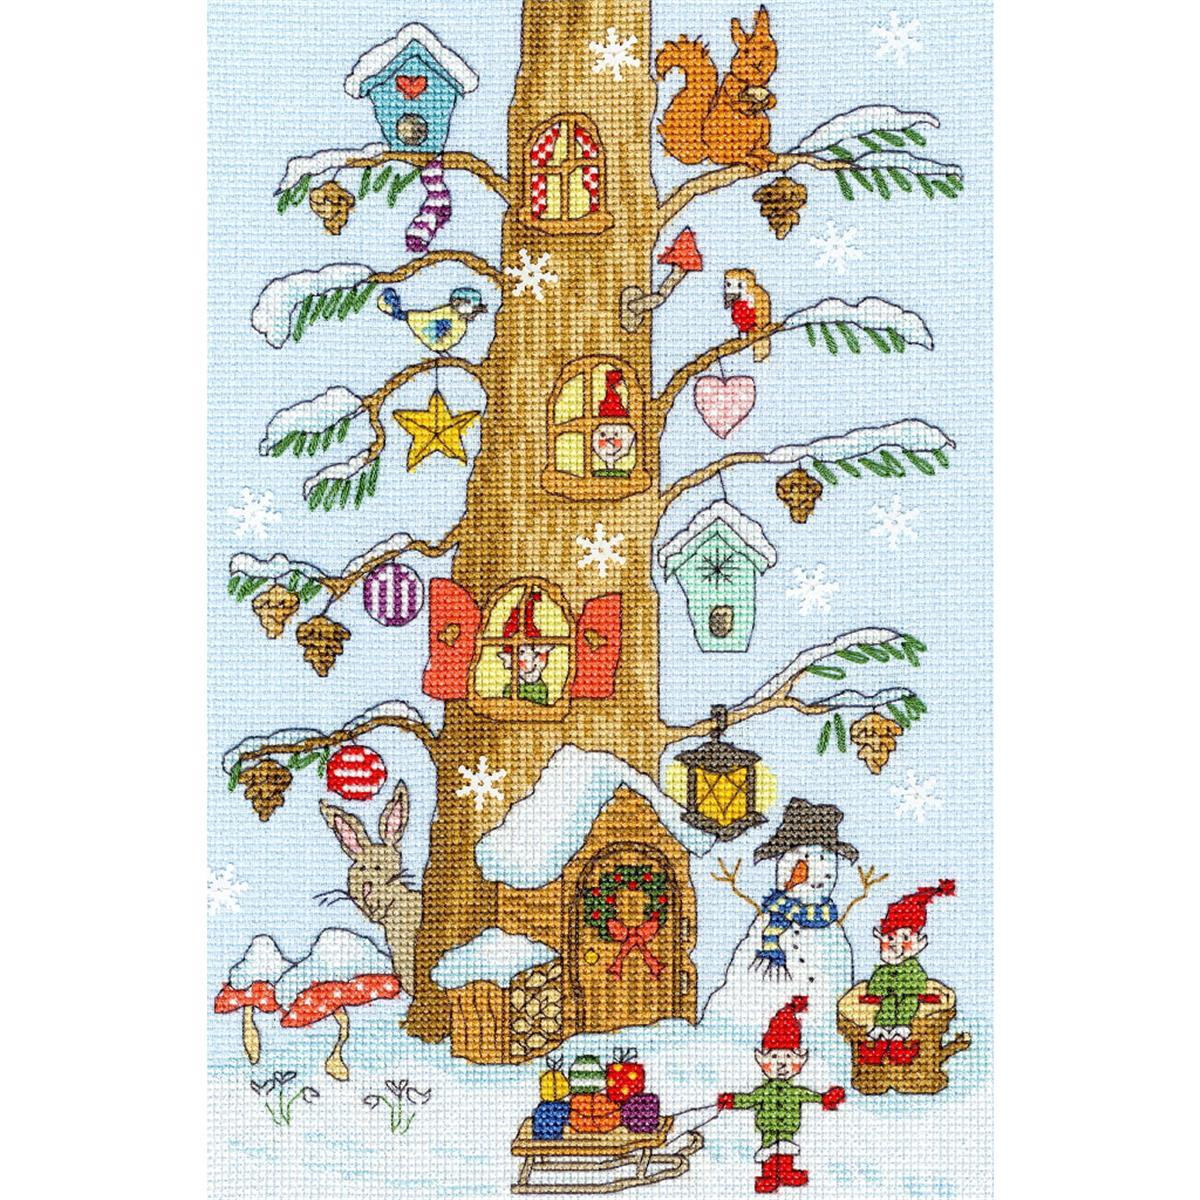 A whimsical scene from Bothy Threads embroidery kit...